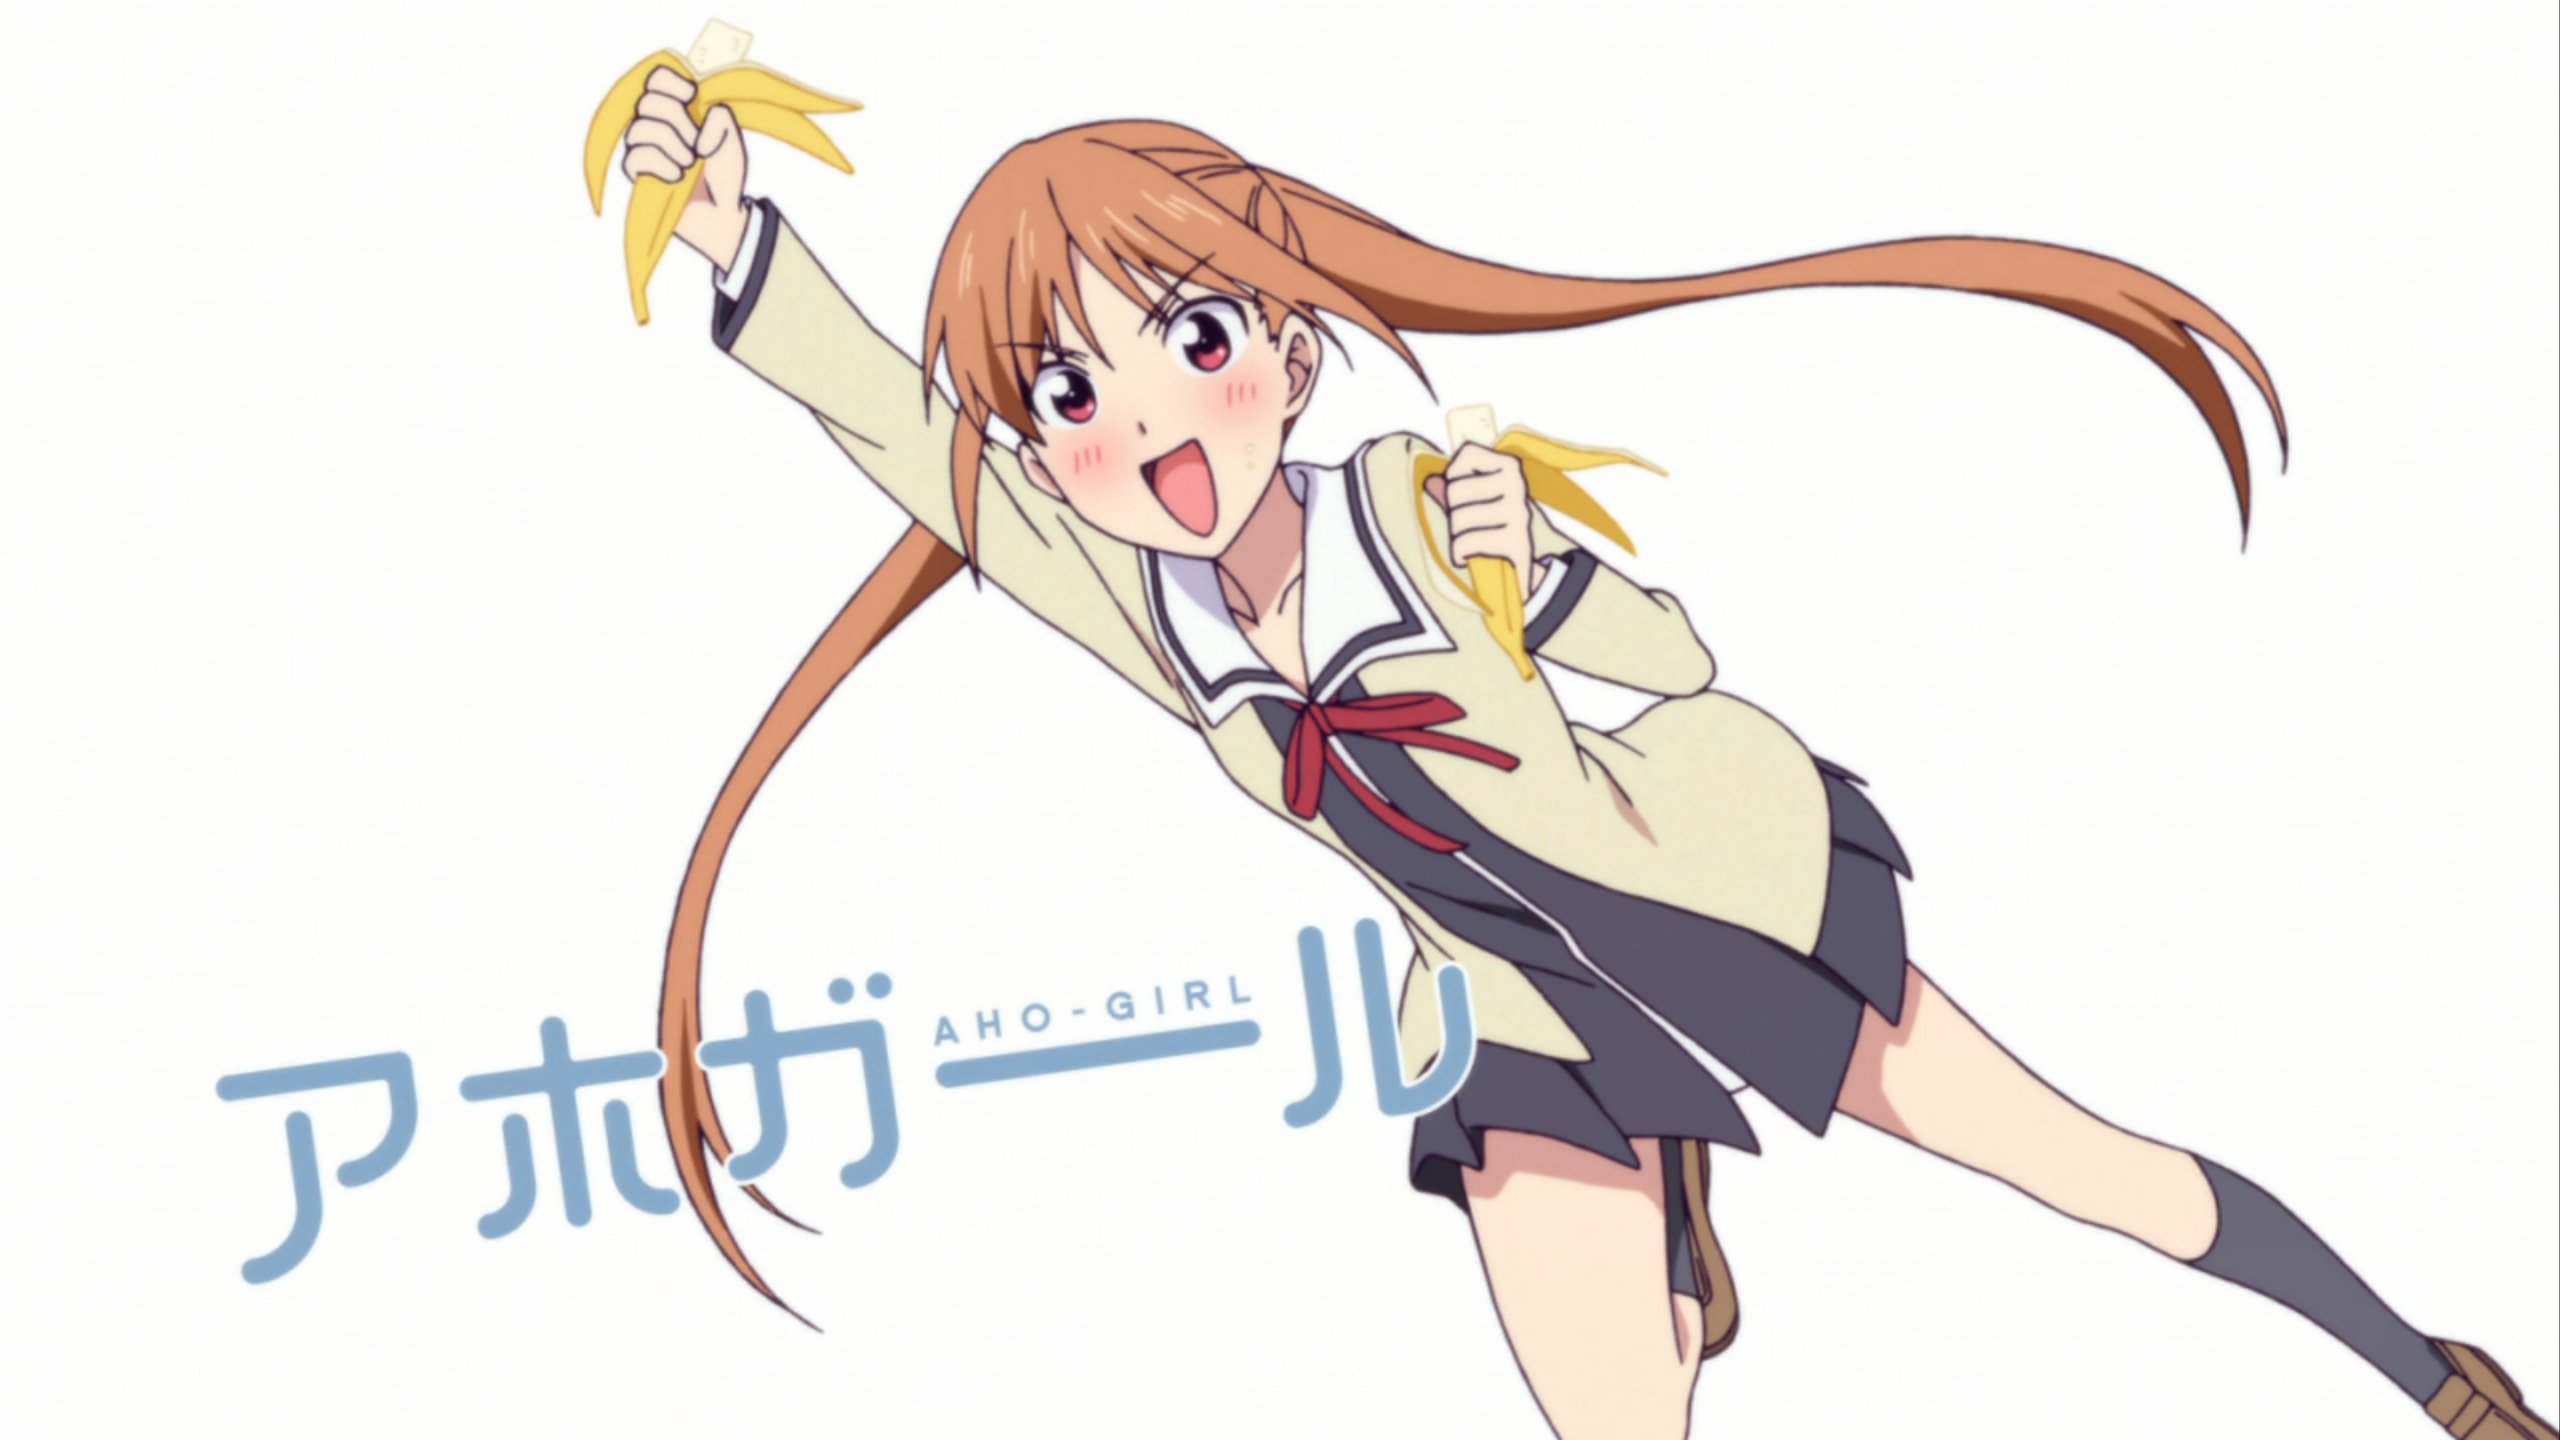 Aho Girl Comedy Wallpapers Full HD 